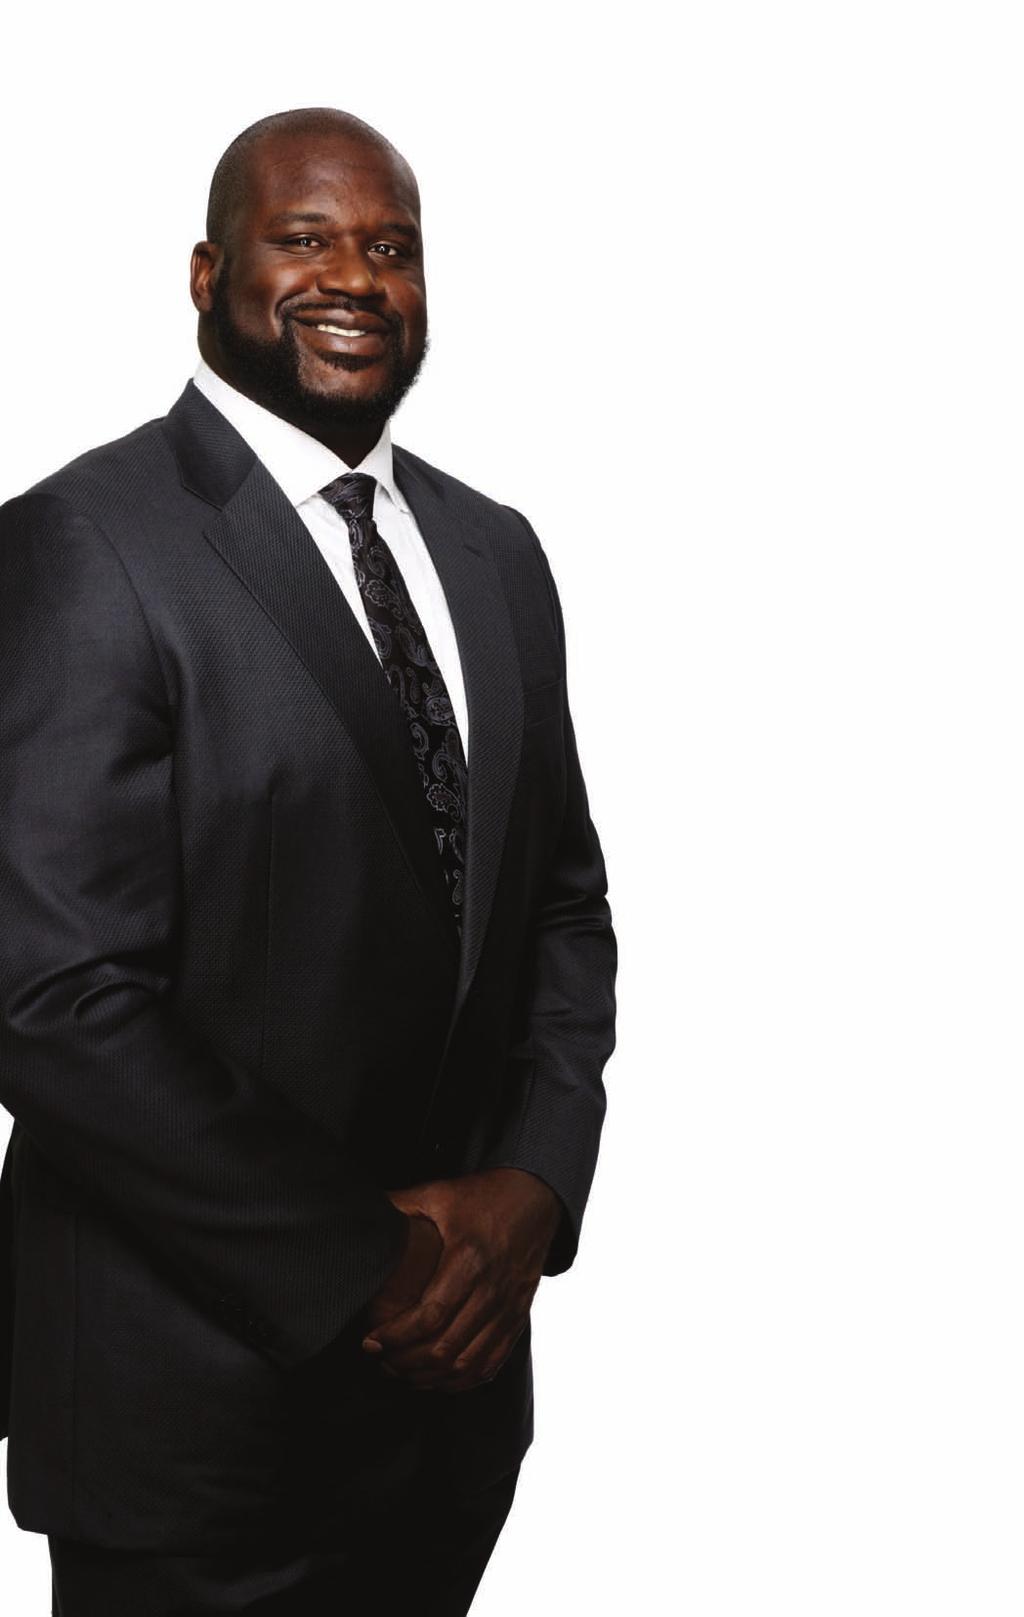 SHAQUILLE O'Neal Shaquille O Neal, often referred to as Shaq, is a former NBA superstar and current sports analyst on the television program, Inside the NBA.